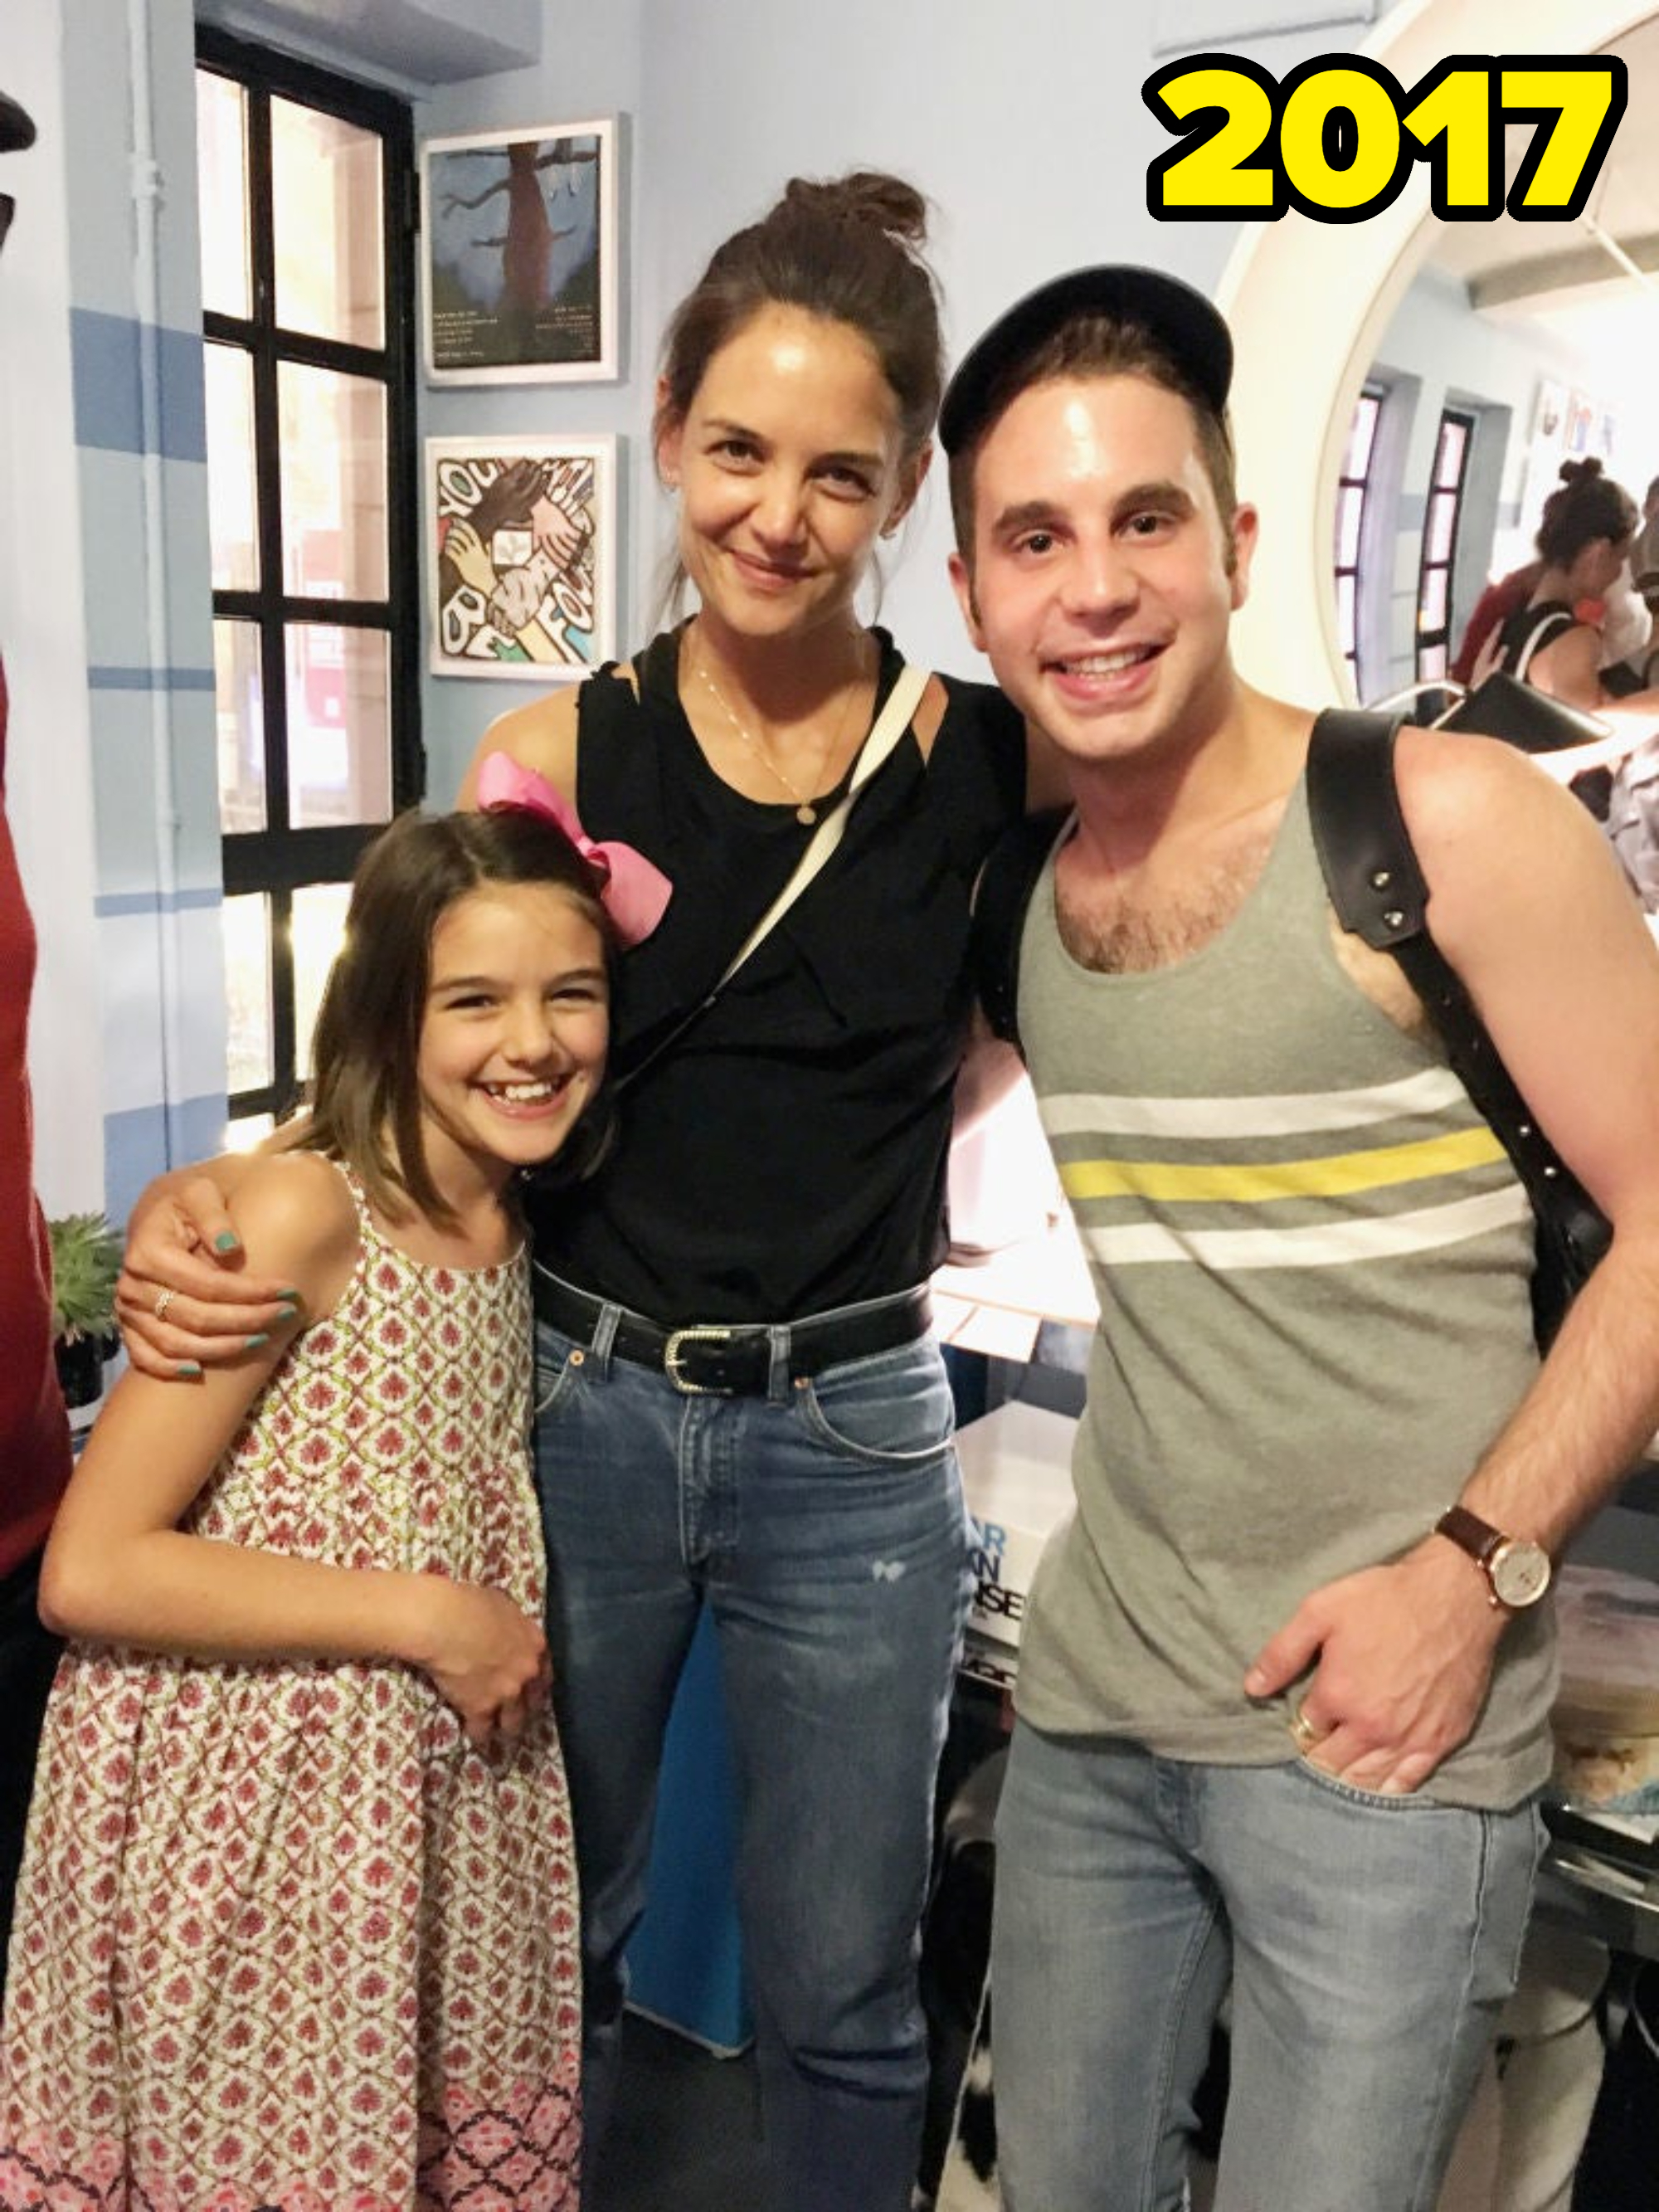 Katie Holmes, Suri Cruise, and Ben Platt are smiling together indoors. Katie and Suri are casually dressed; Ben is in a tank top and cap